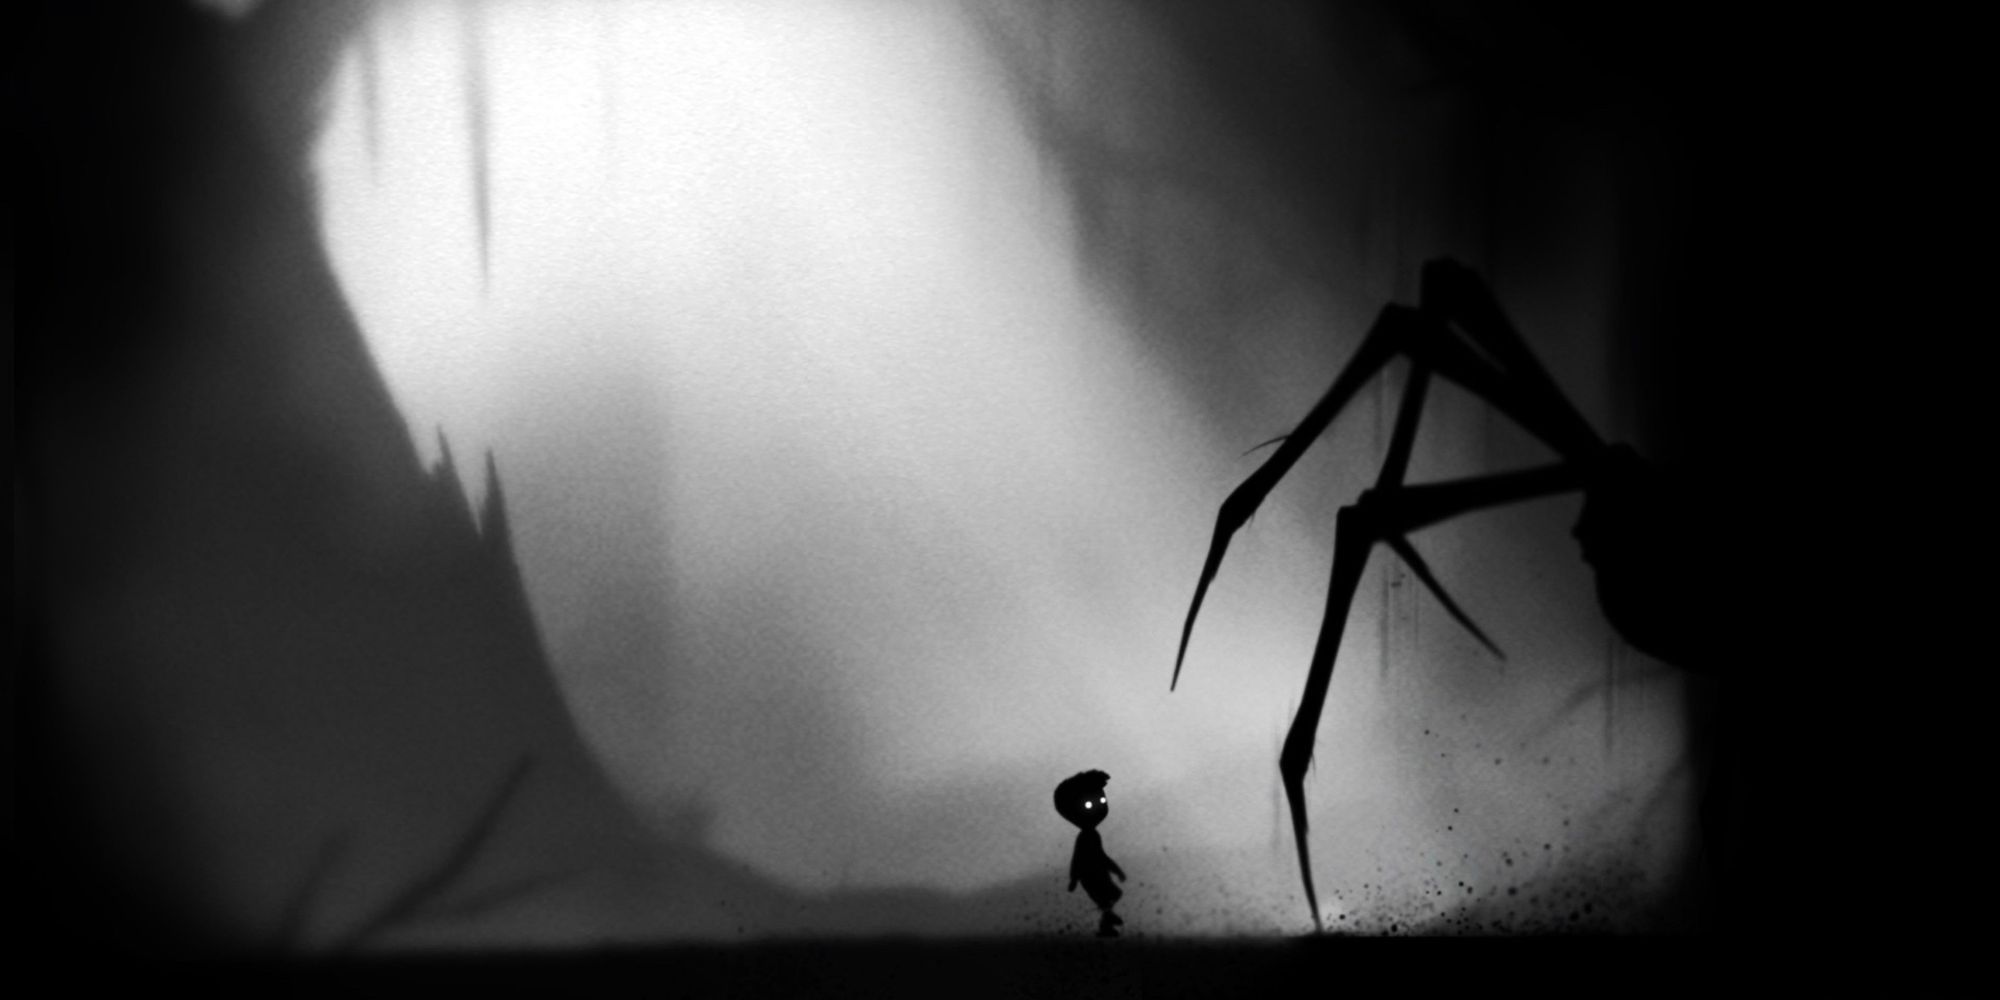 The boy and the giant spider enemy in limbo